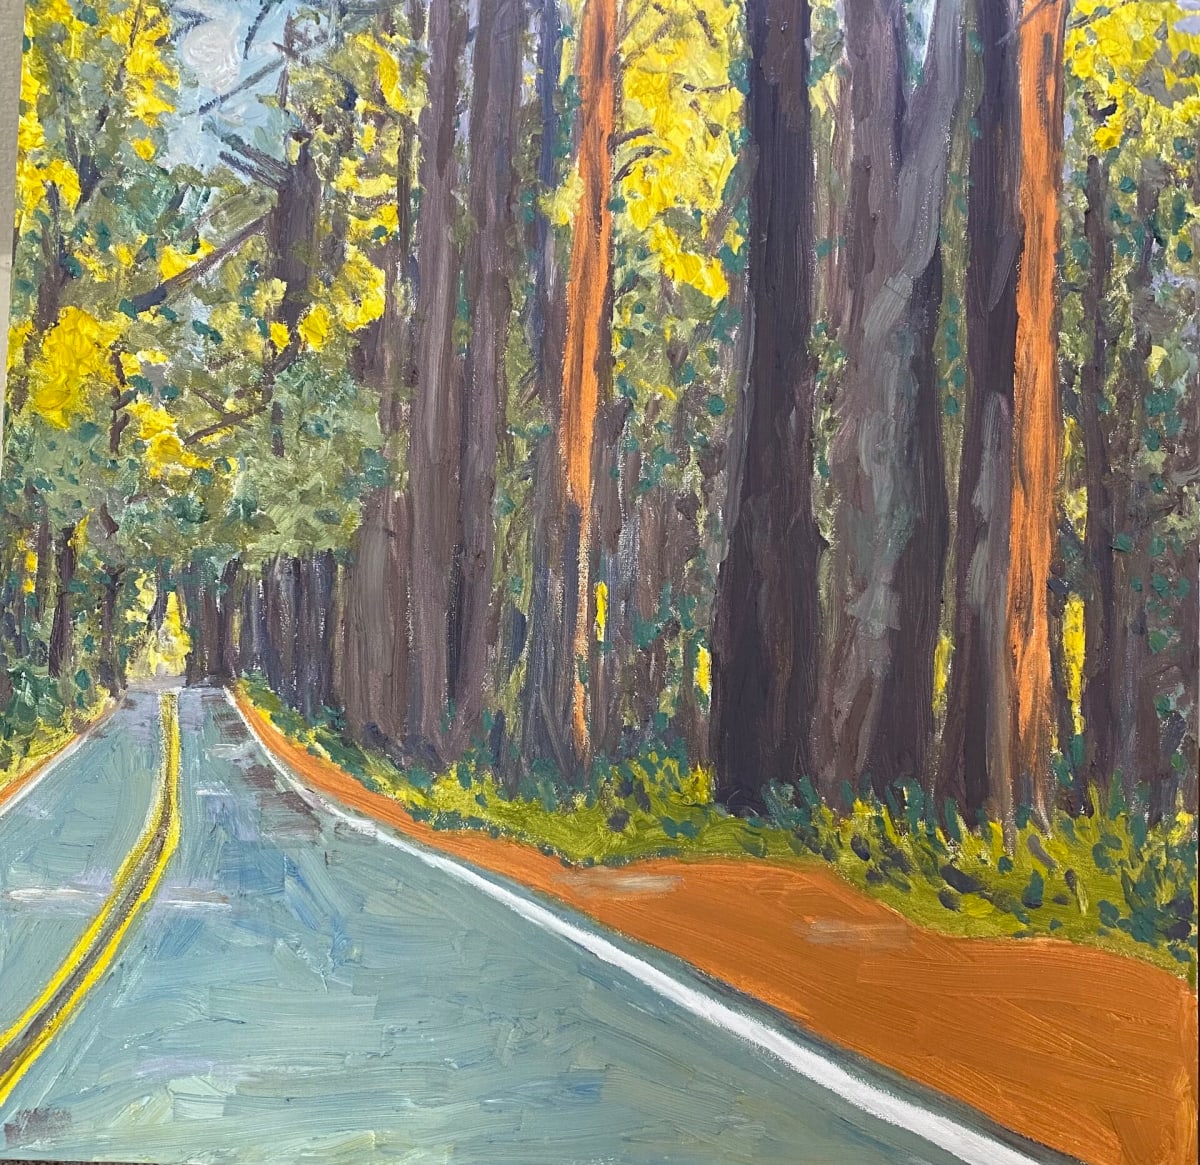 Winding Through Redwoods by Jenny Emerson 